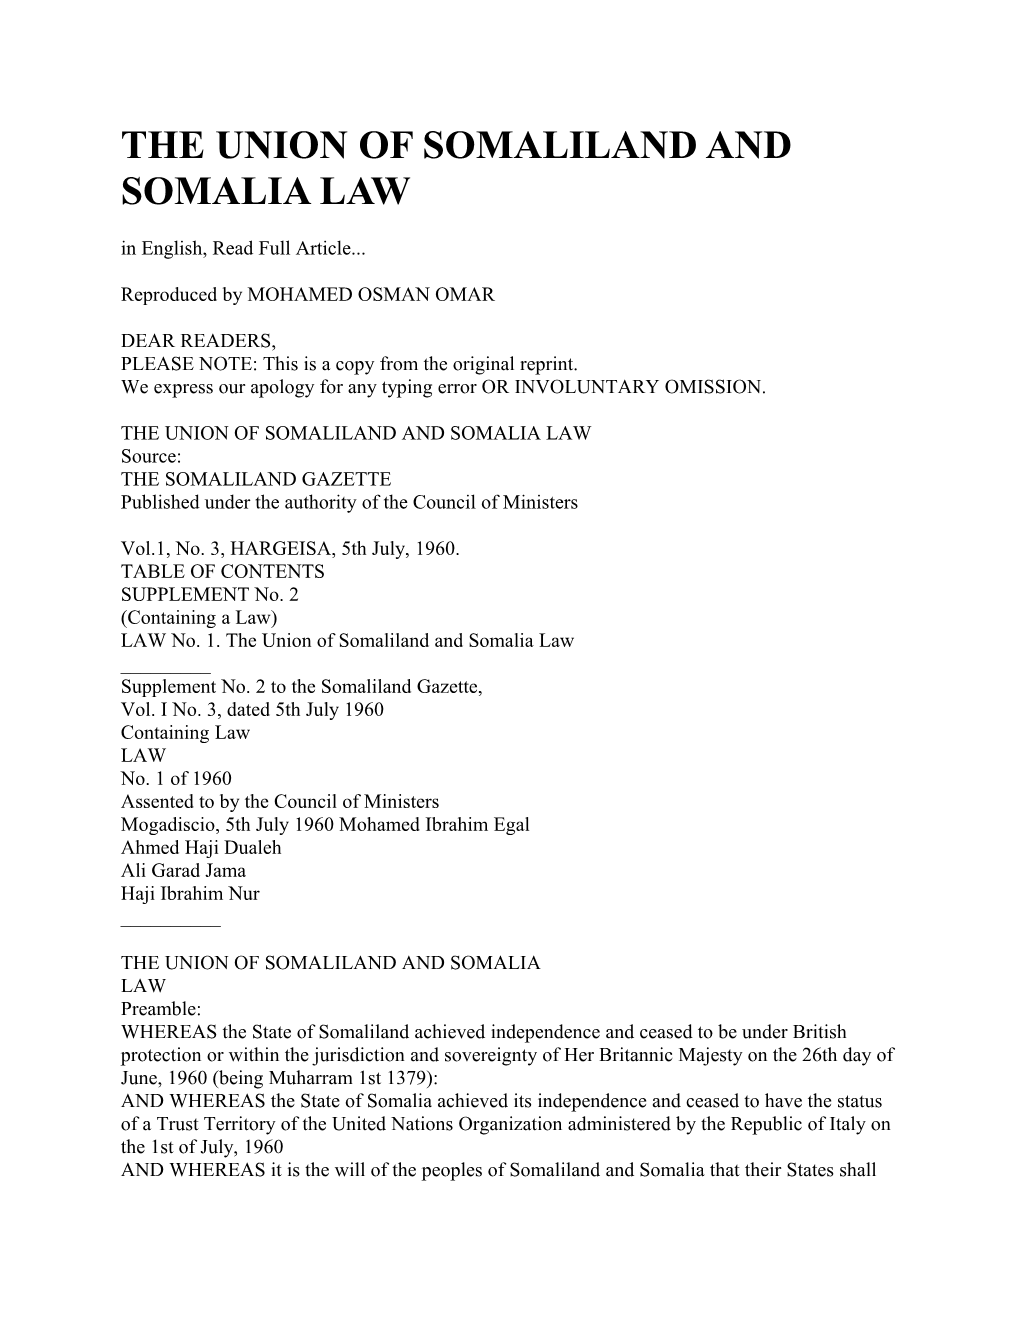 The Union of Somaliland and Somalia Law